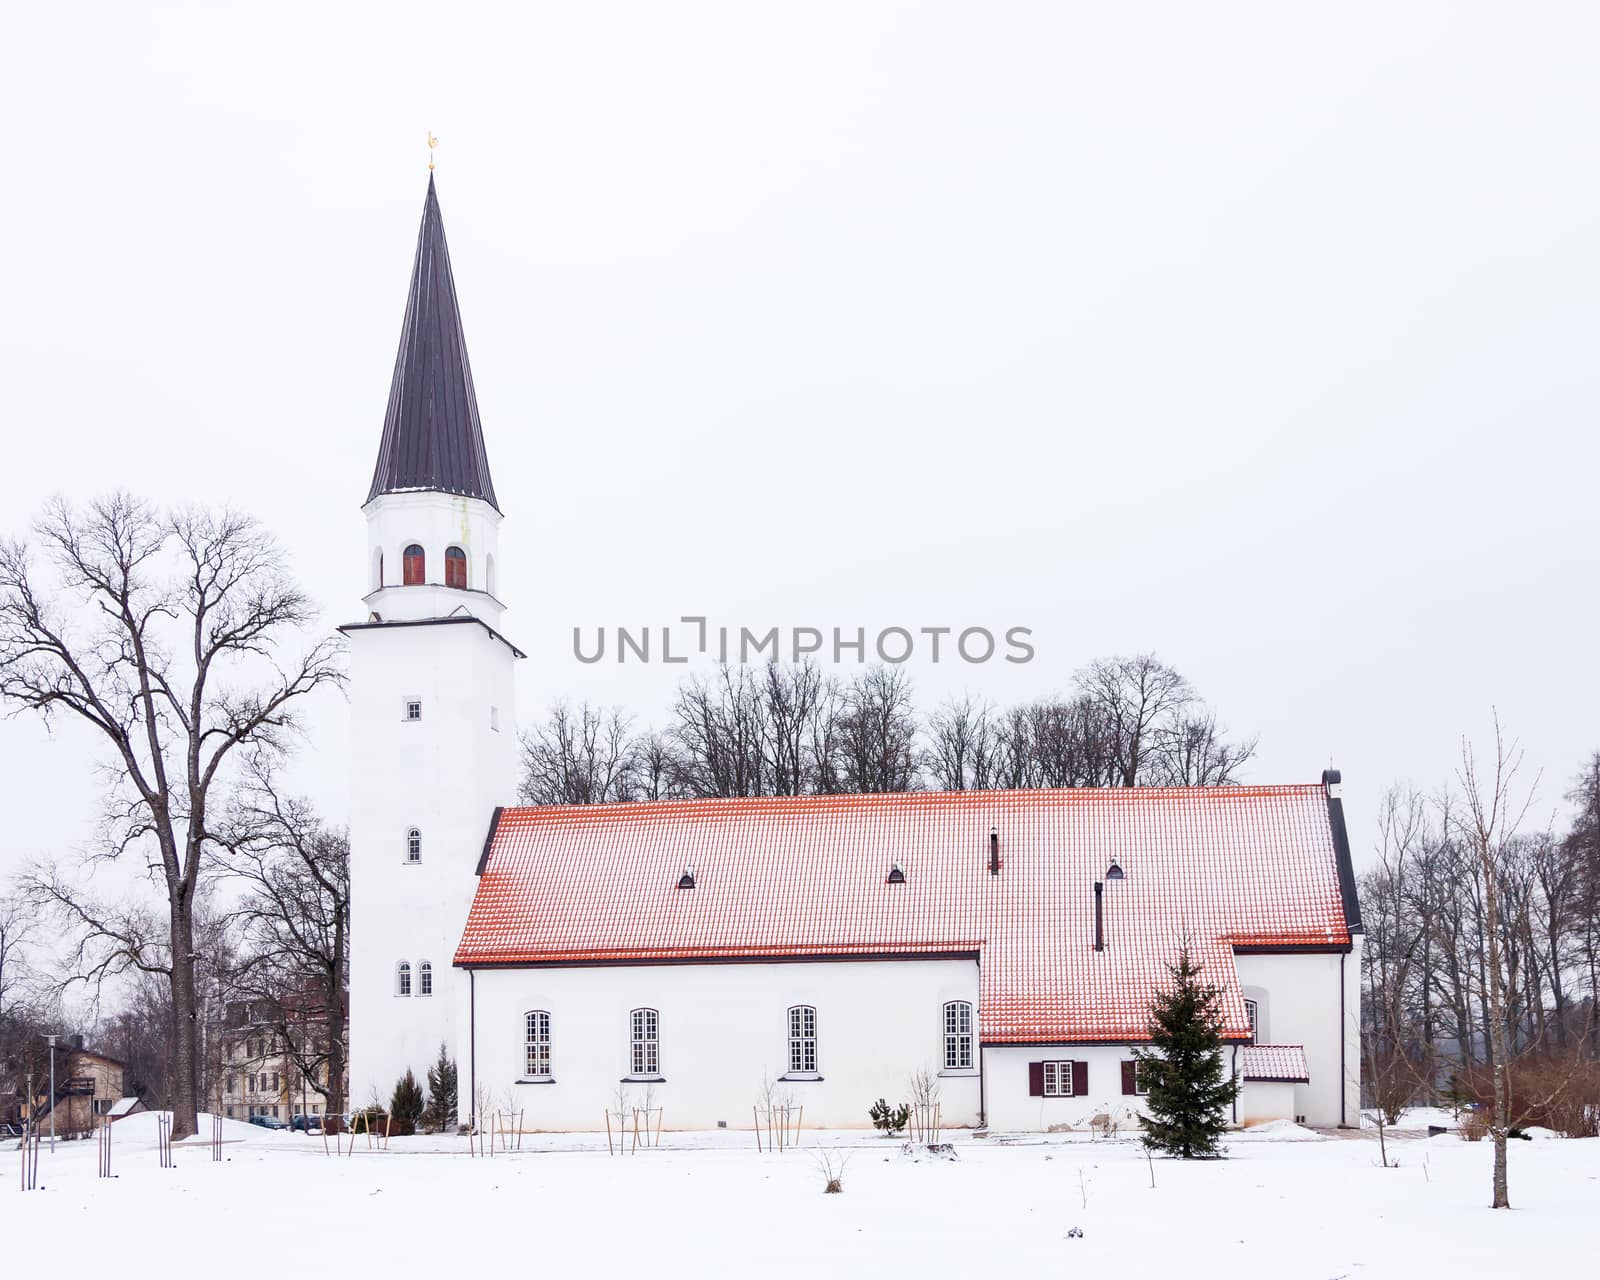 Sigulda is a town in Latvia and the church is pictured on a winter day.